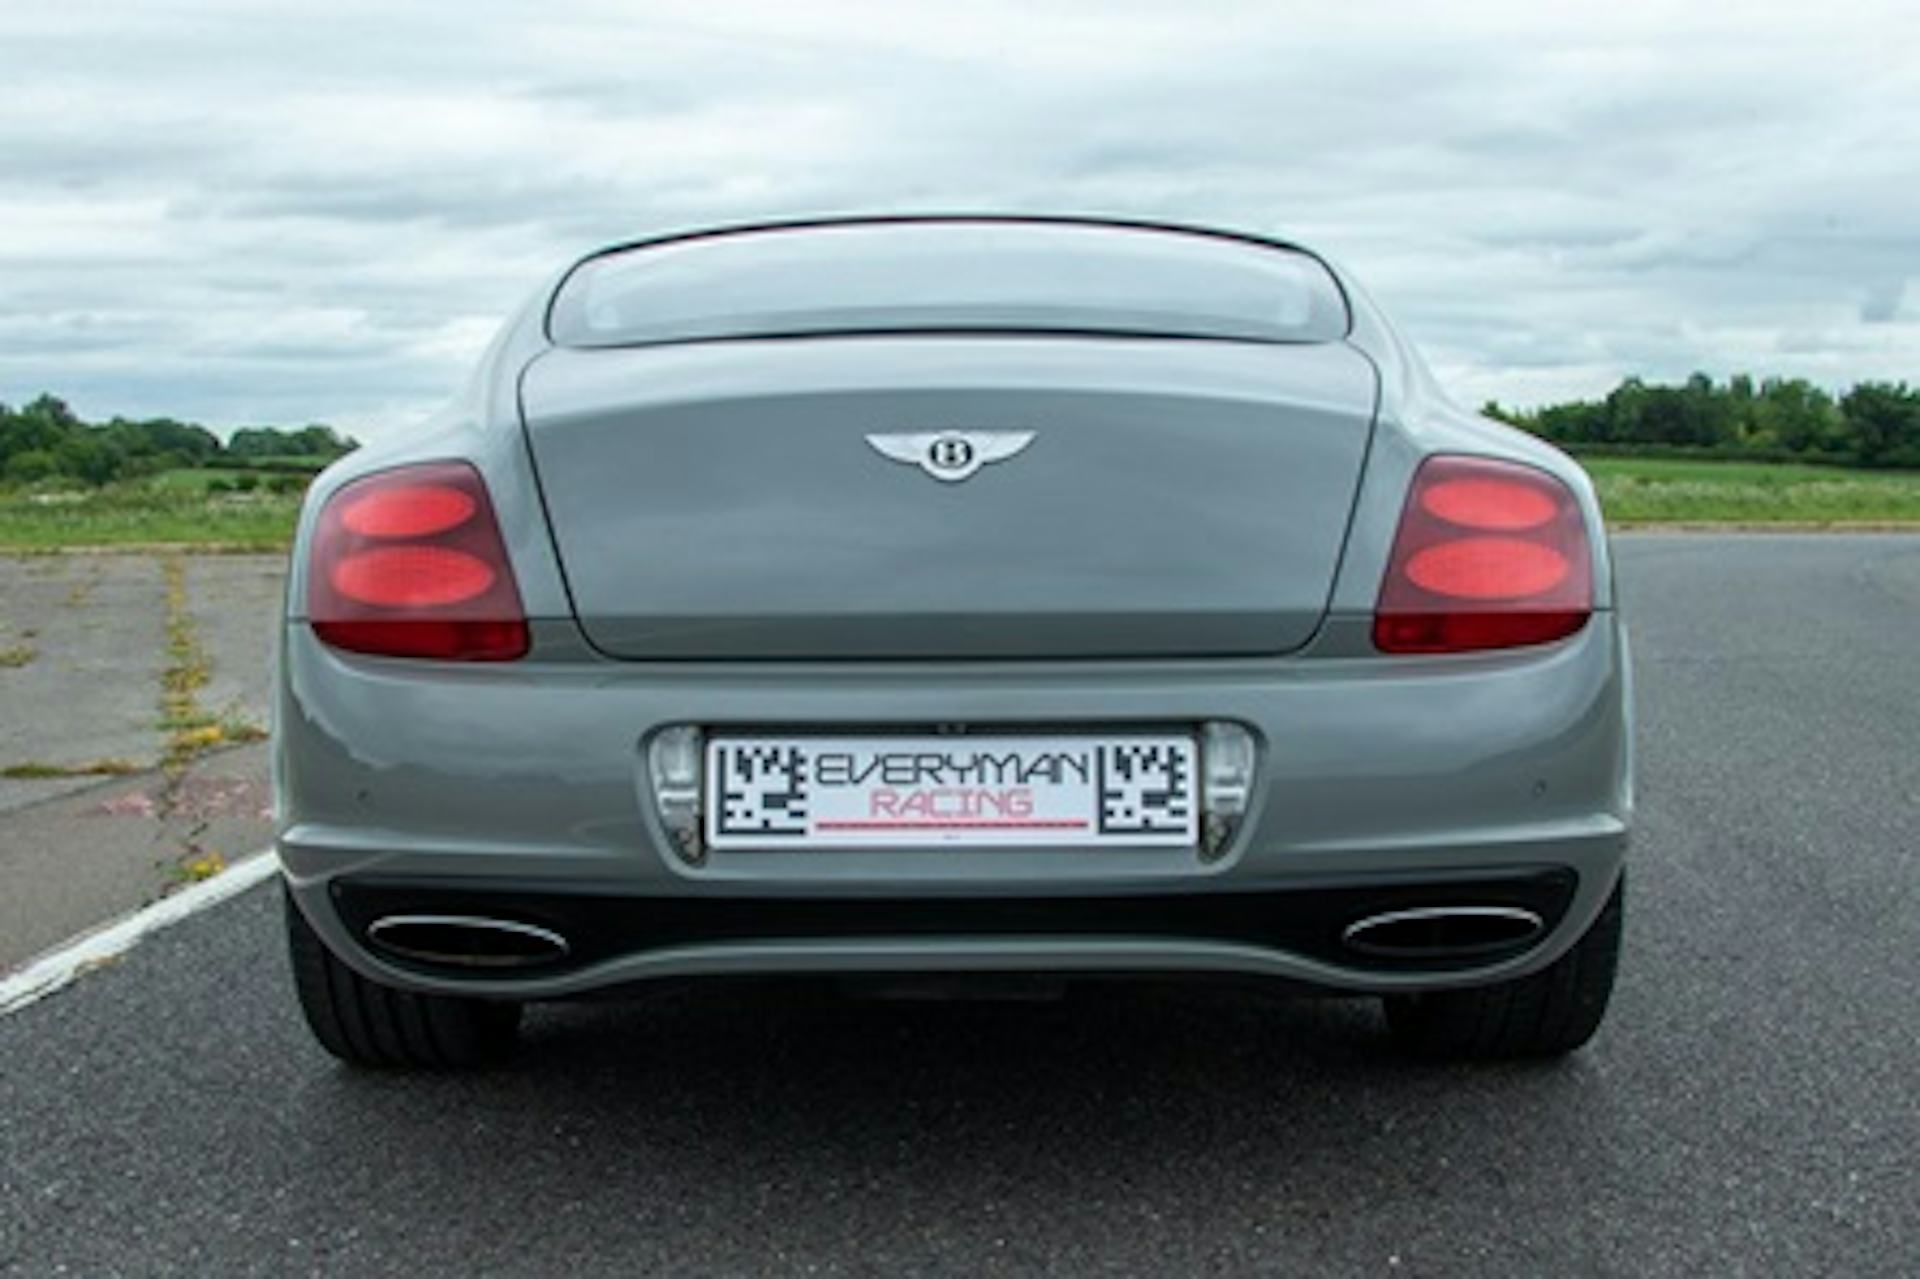 Bentley Supersport Driving Experience - Anytime